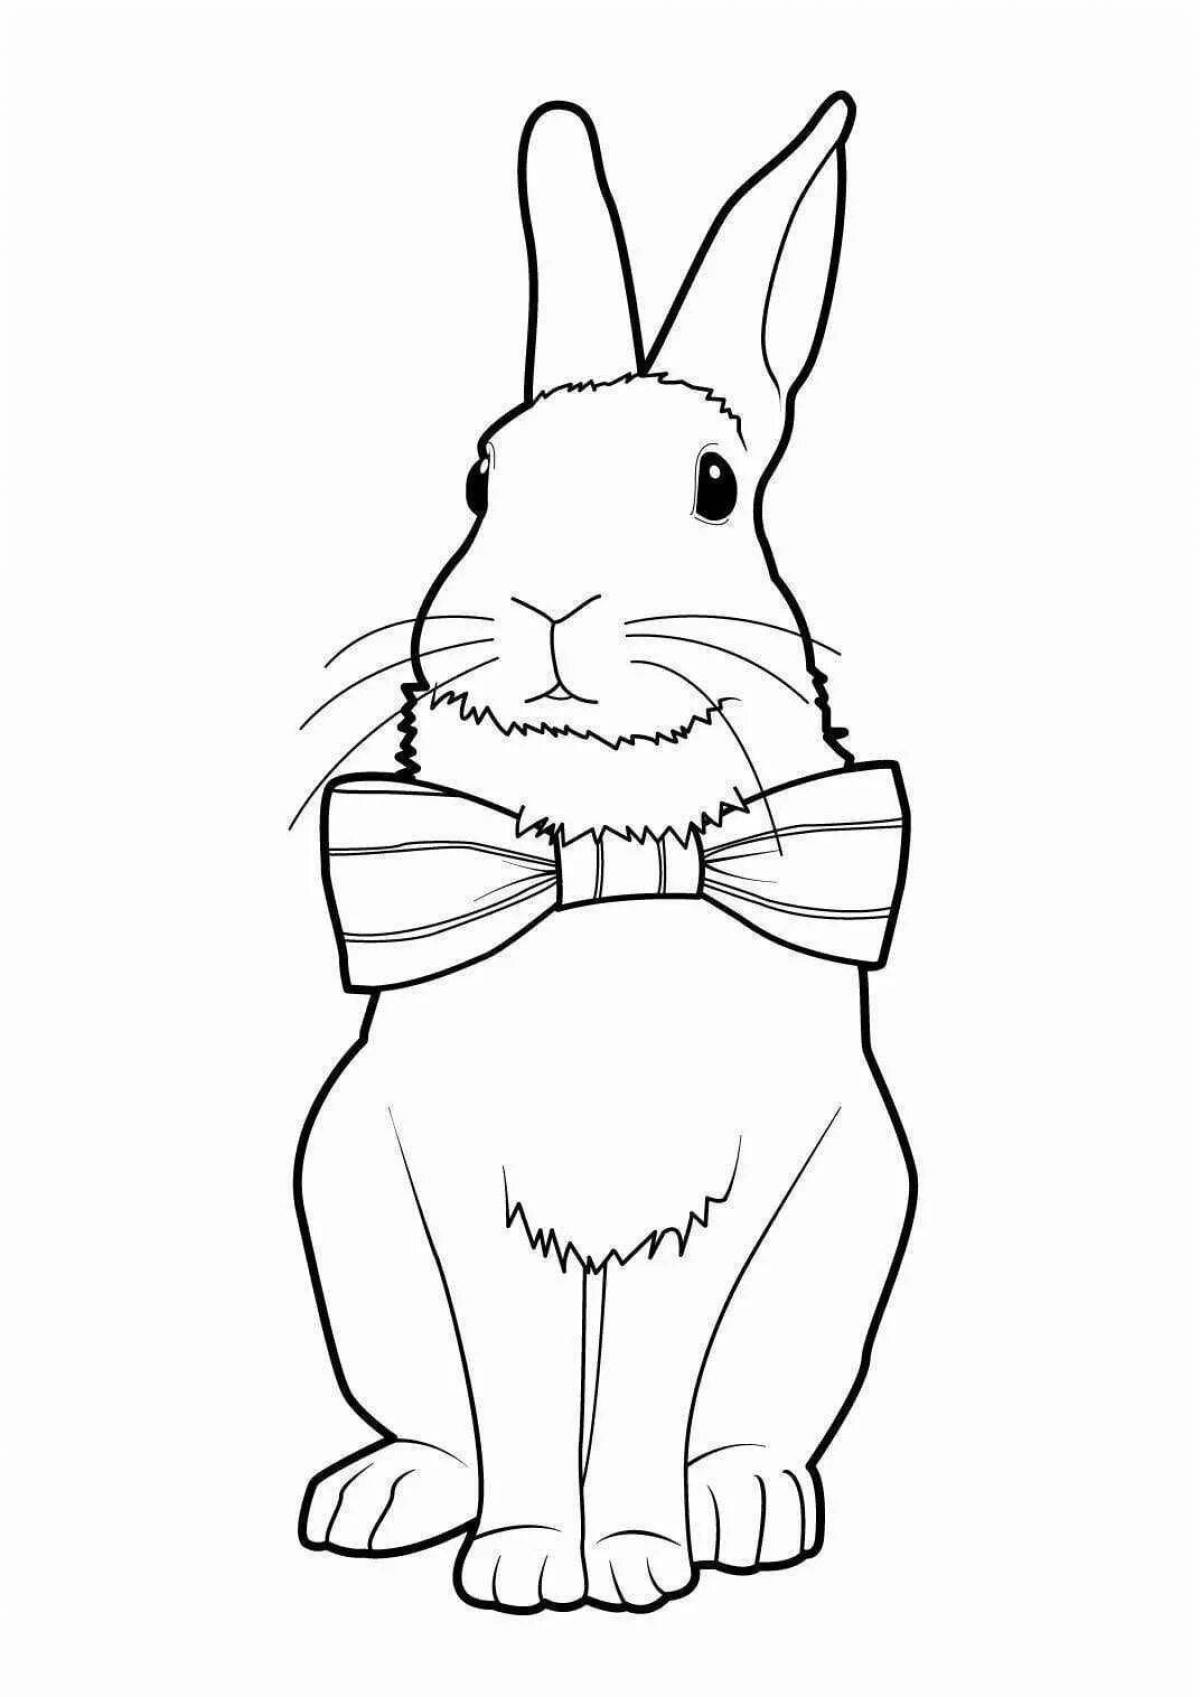 Coloring book playful rabbit hare